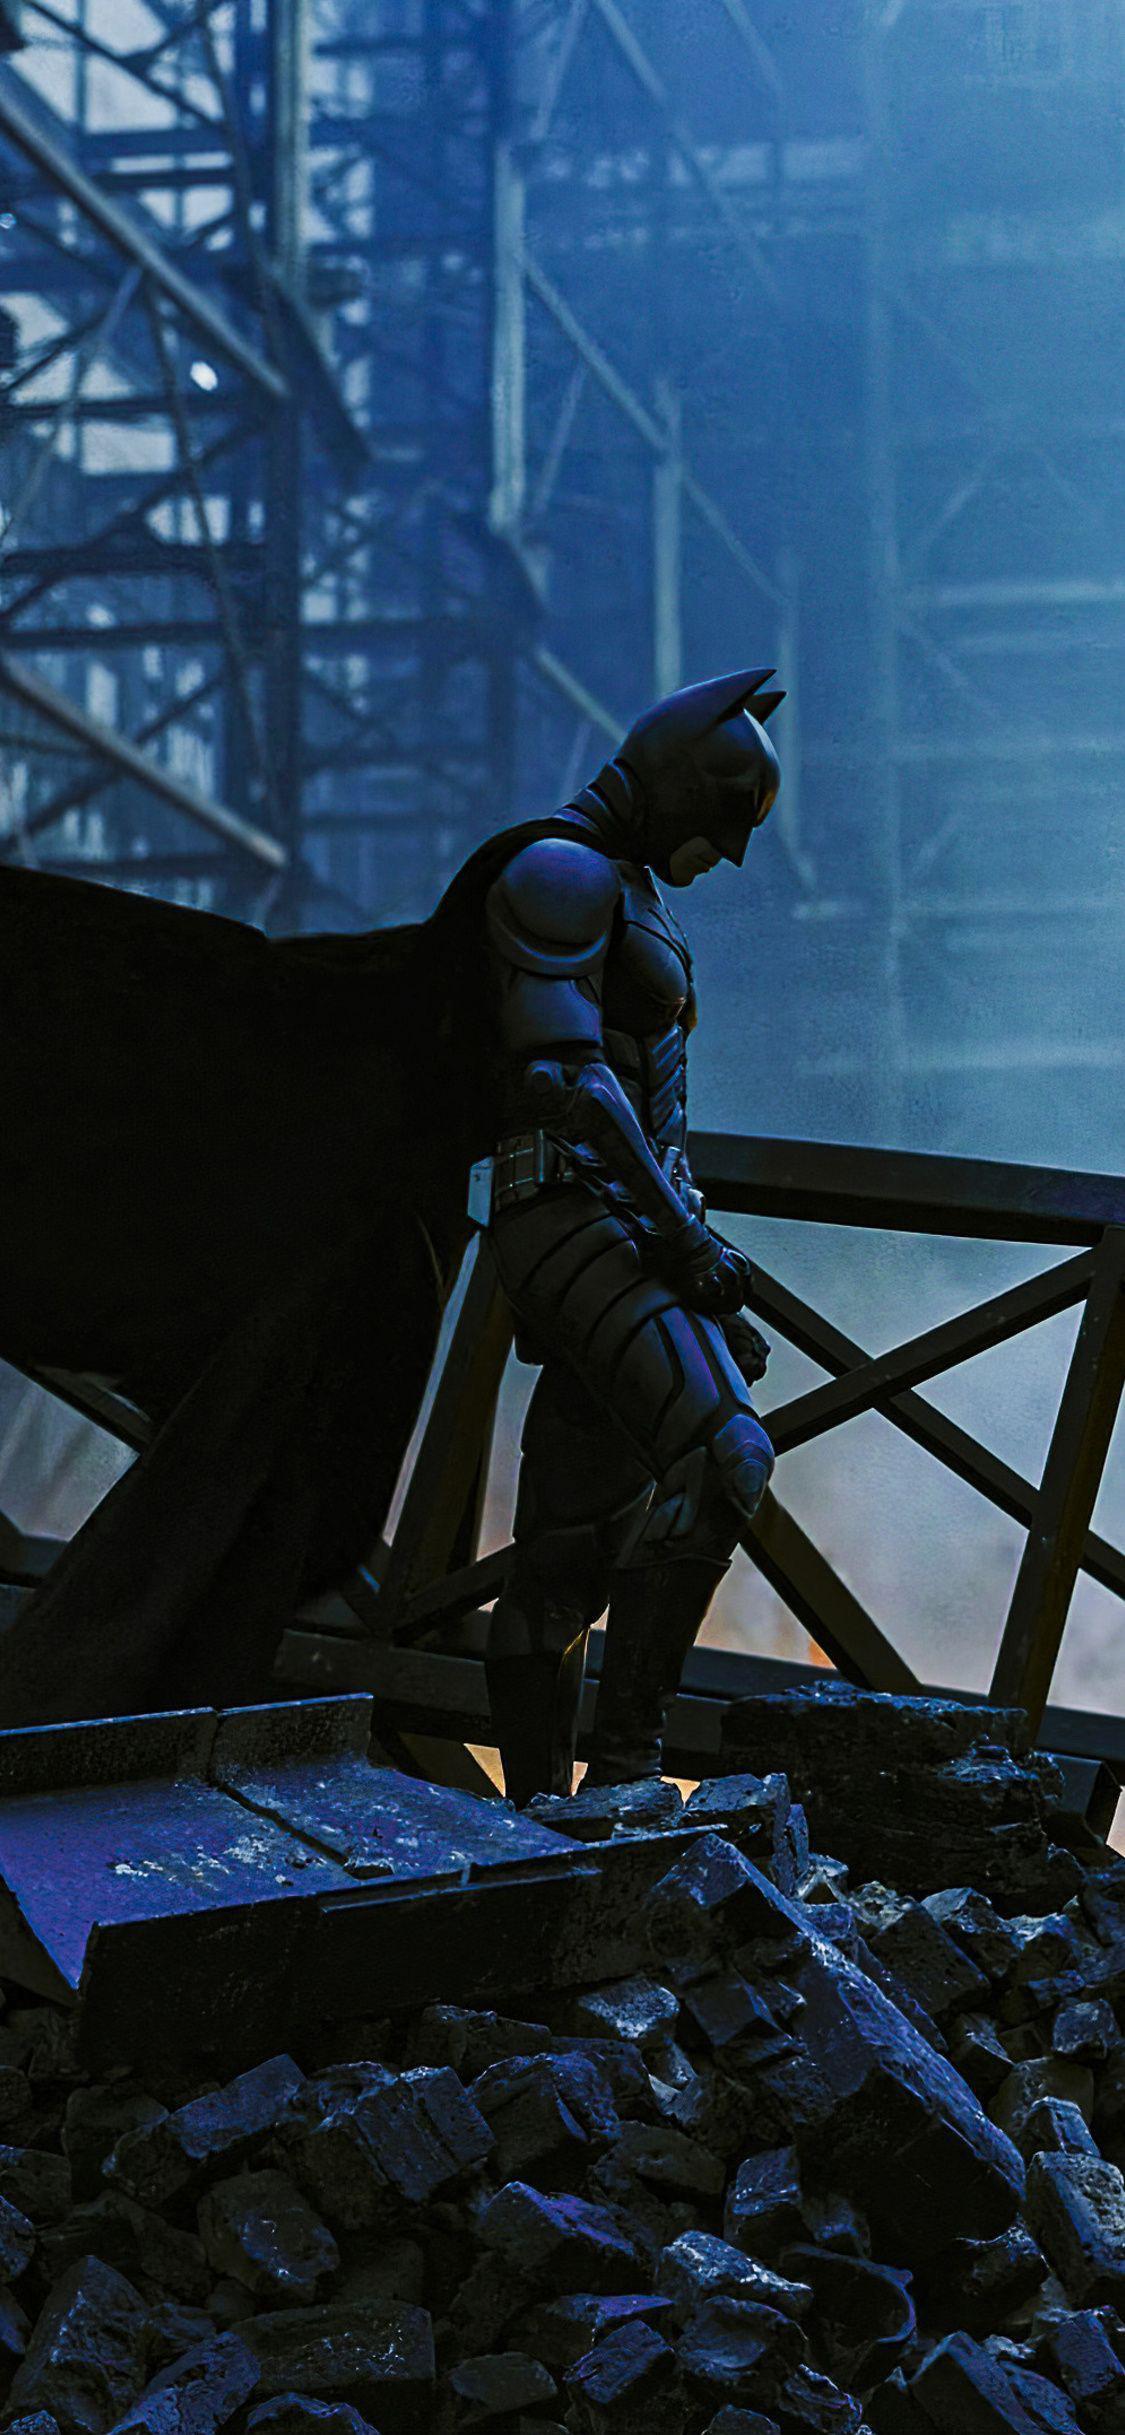 Endure This Has To Be My Favorite Pic Of The Dark Knight His